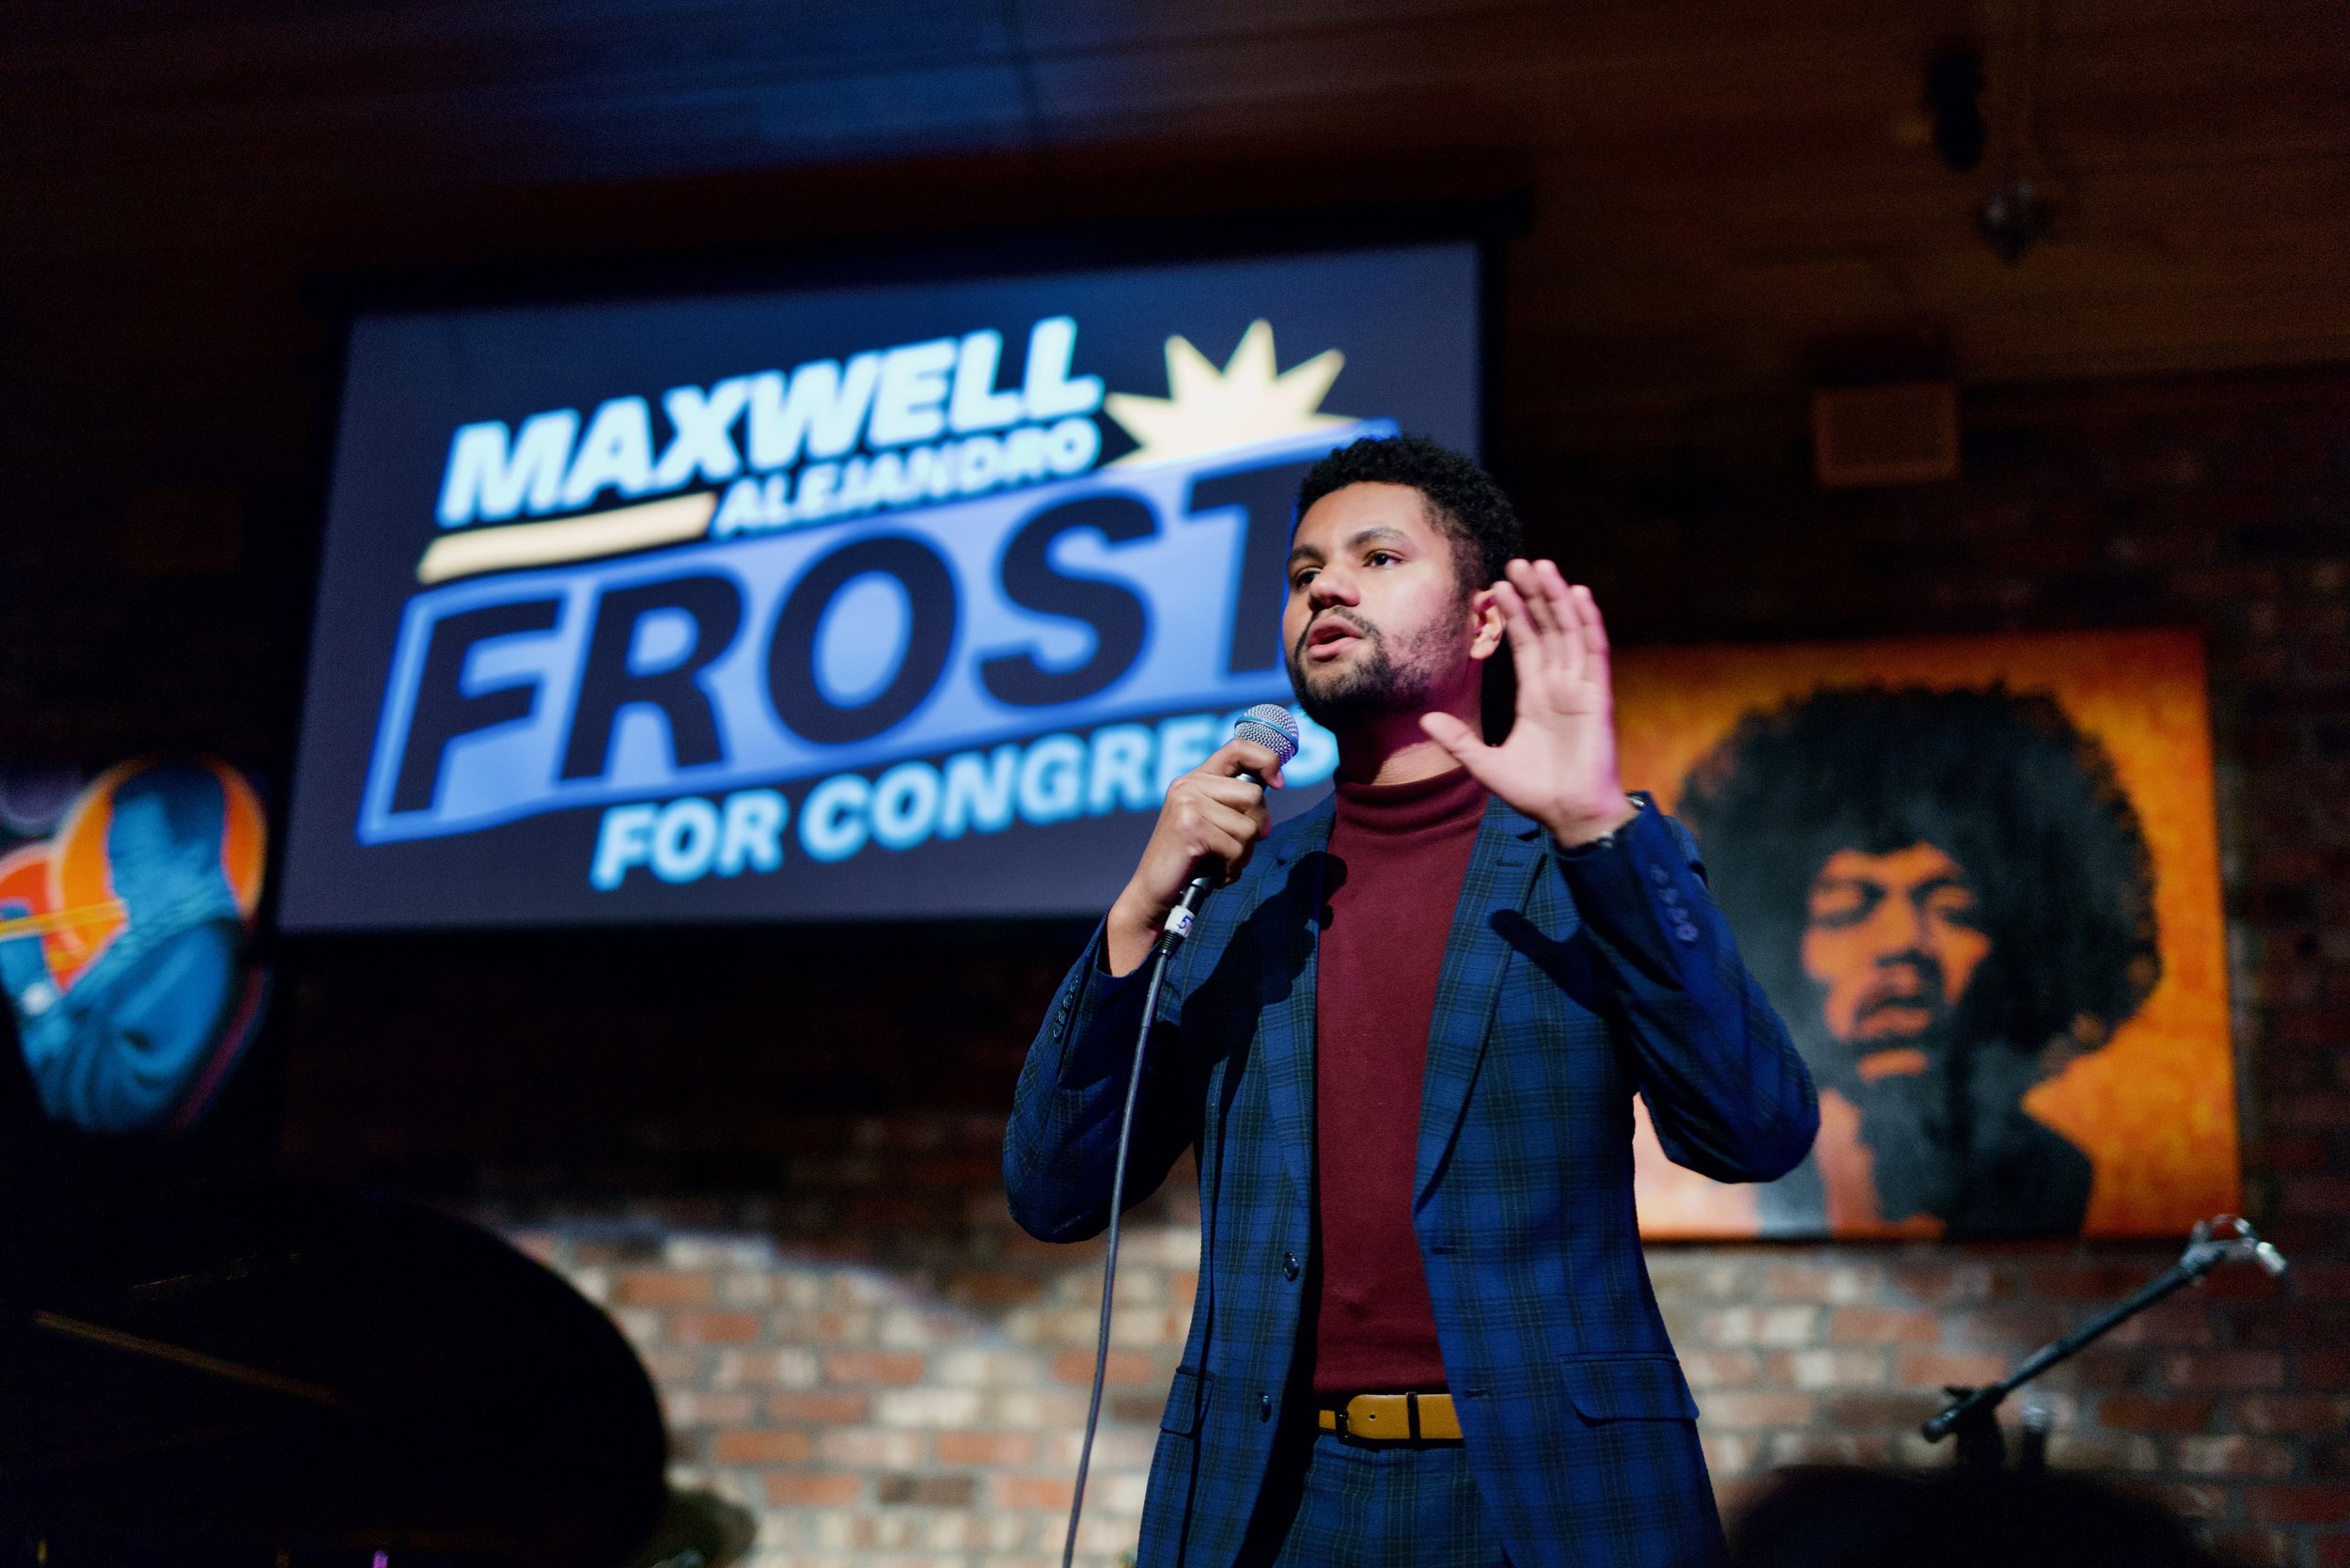 About — Maxwell Frost for Congress